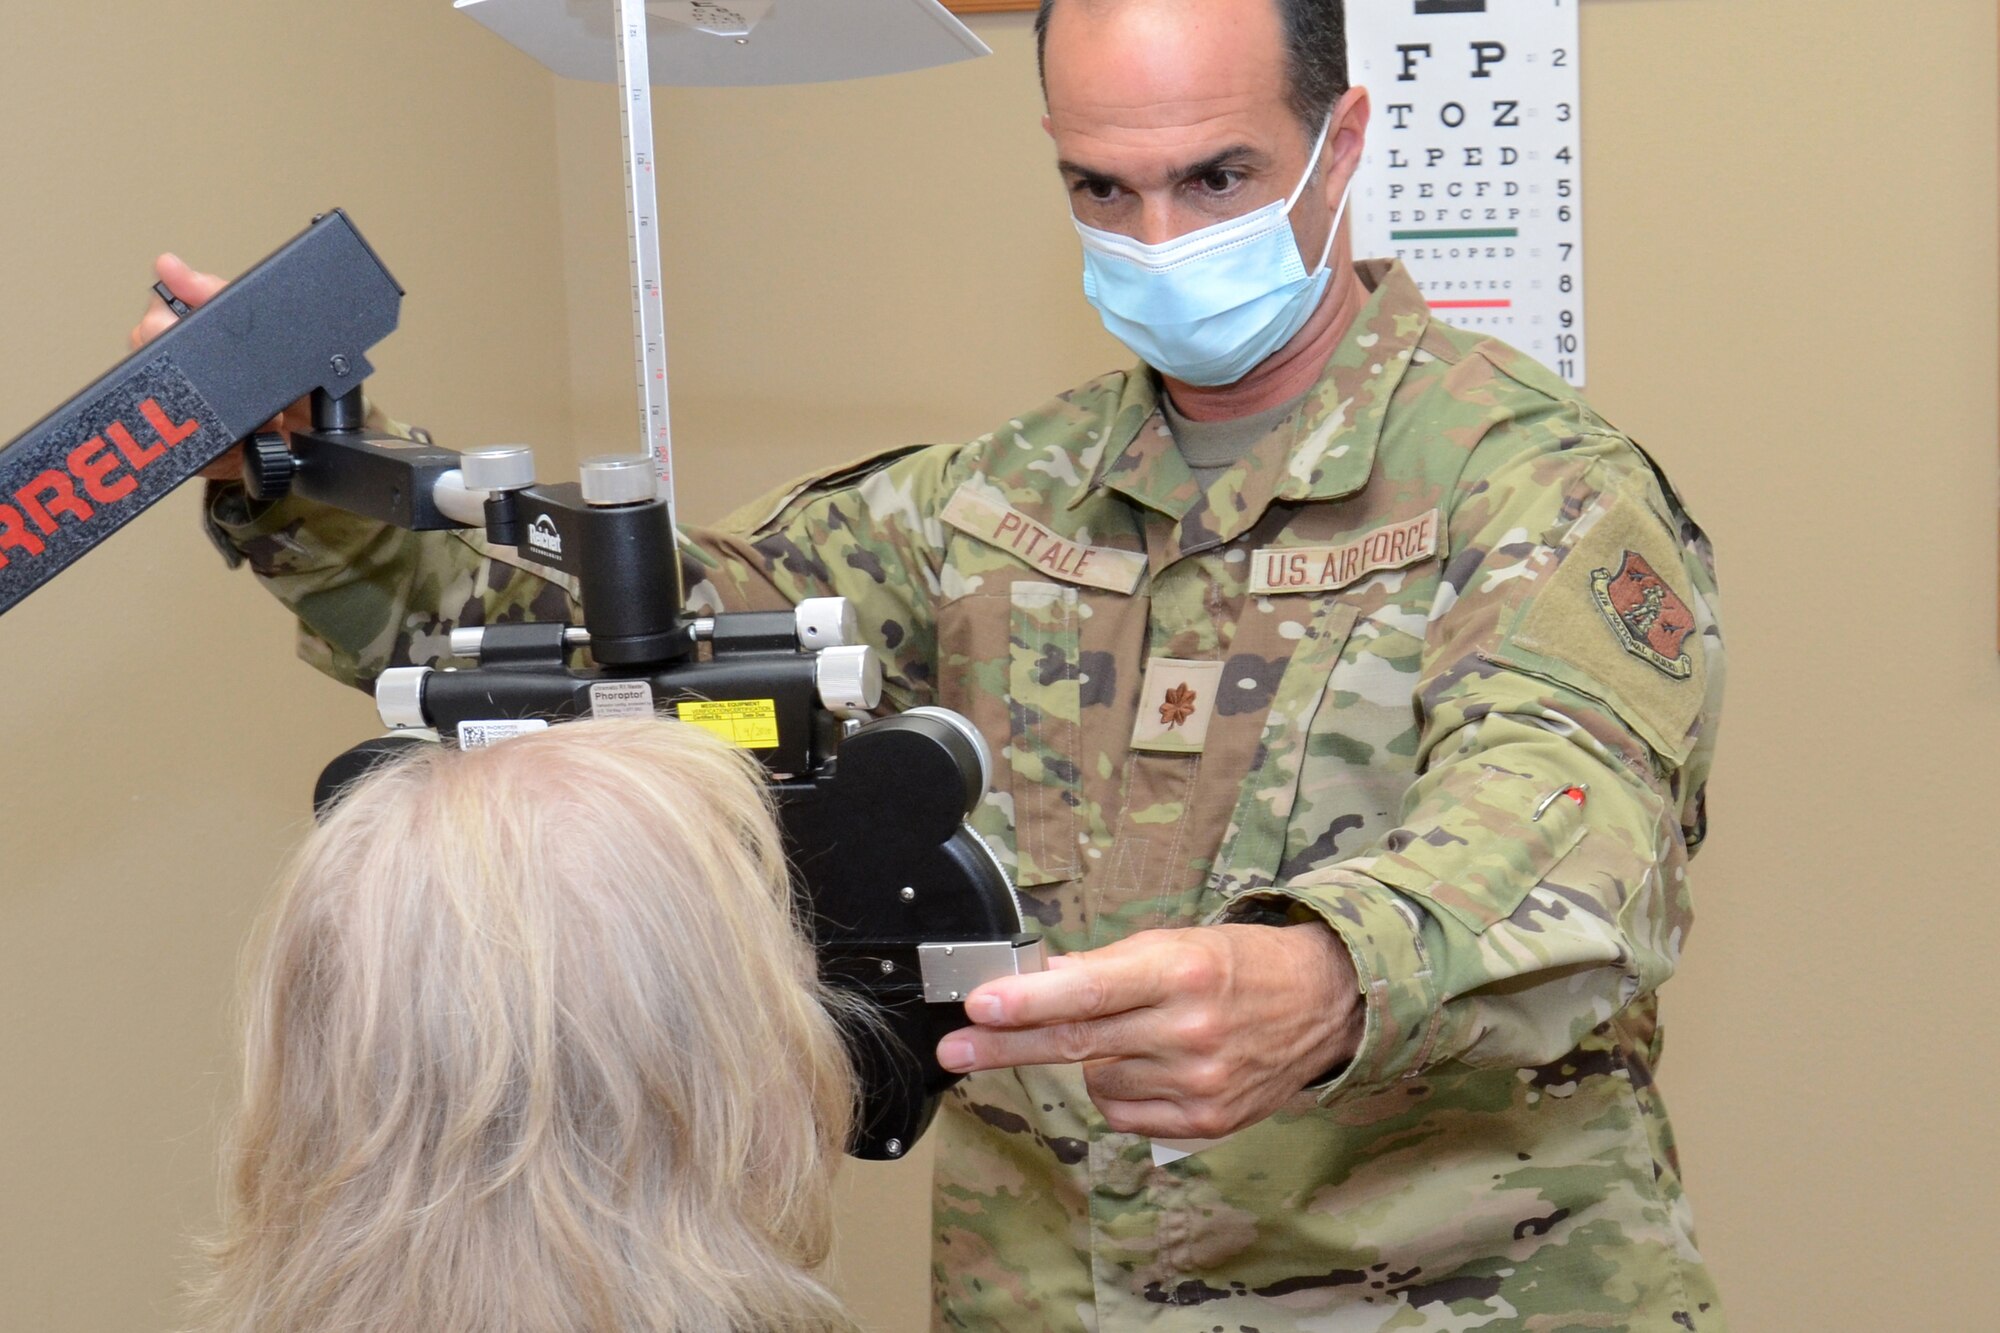 U.S. Air Force Maj. (Dr.) Sean Pitale, assigned to the 169th Fighter Wing, McEntire Joint National Guard Base, South Carolina, supports Operation Healthy Delta, a Department of Defense sponsored Innovative Readiness Training program designed to provide military training opportunities by providing key services to local citizens. Pitale is administering an eye exam at Sikeston, Missouri June 15, 2021. (U.S. Air National Guard photo by Lt. Col. Jim St.Clair, 169th Fighter Wing Public Affairs)